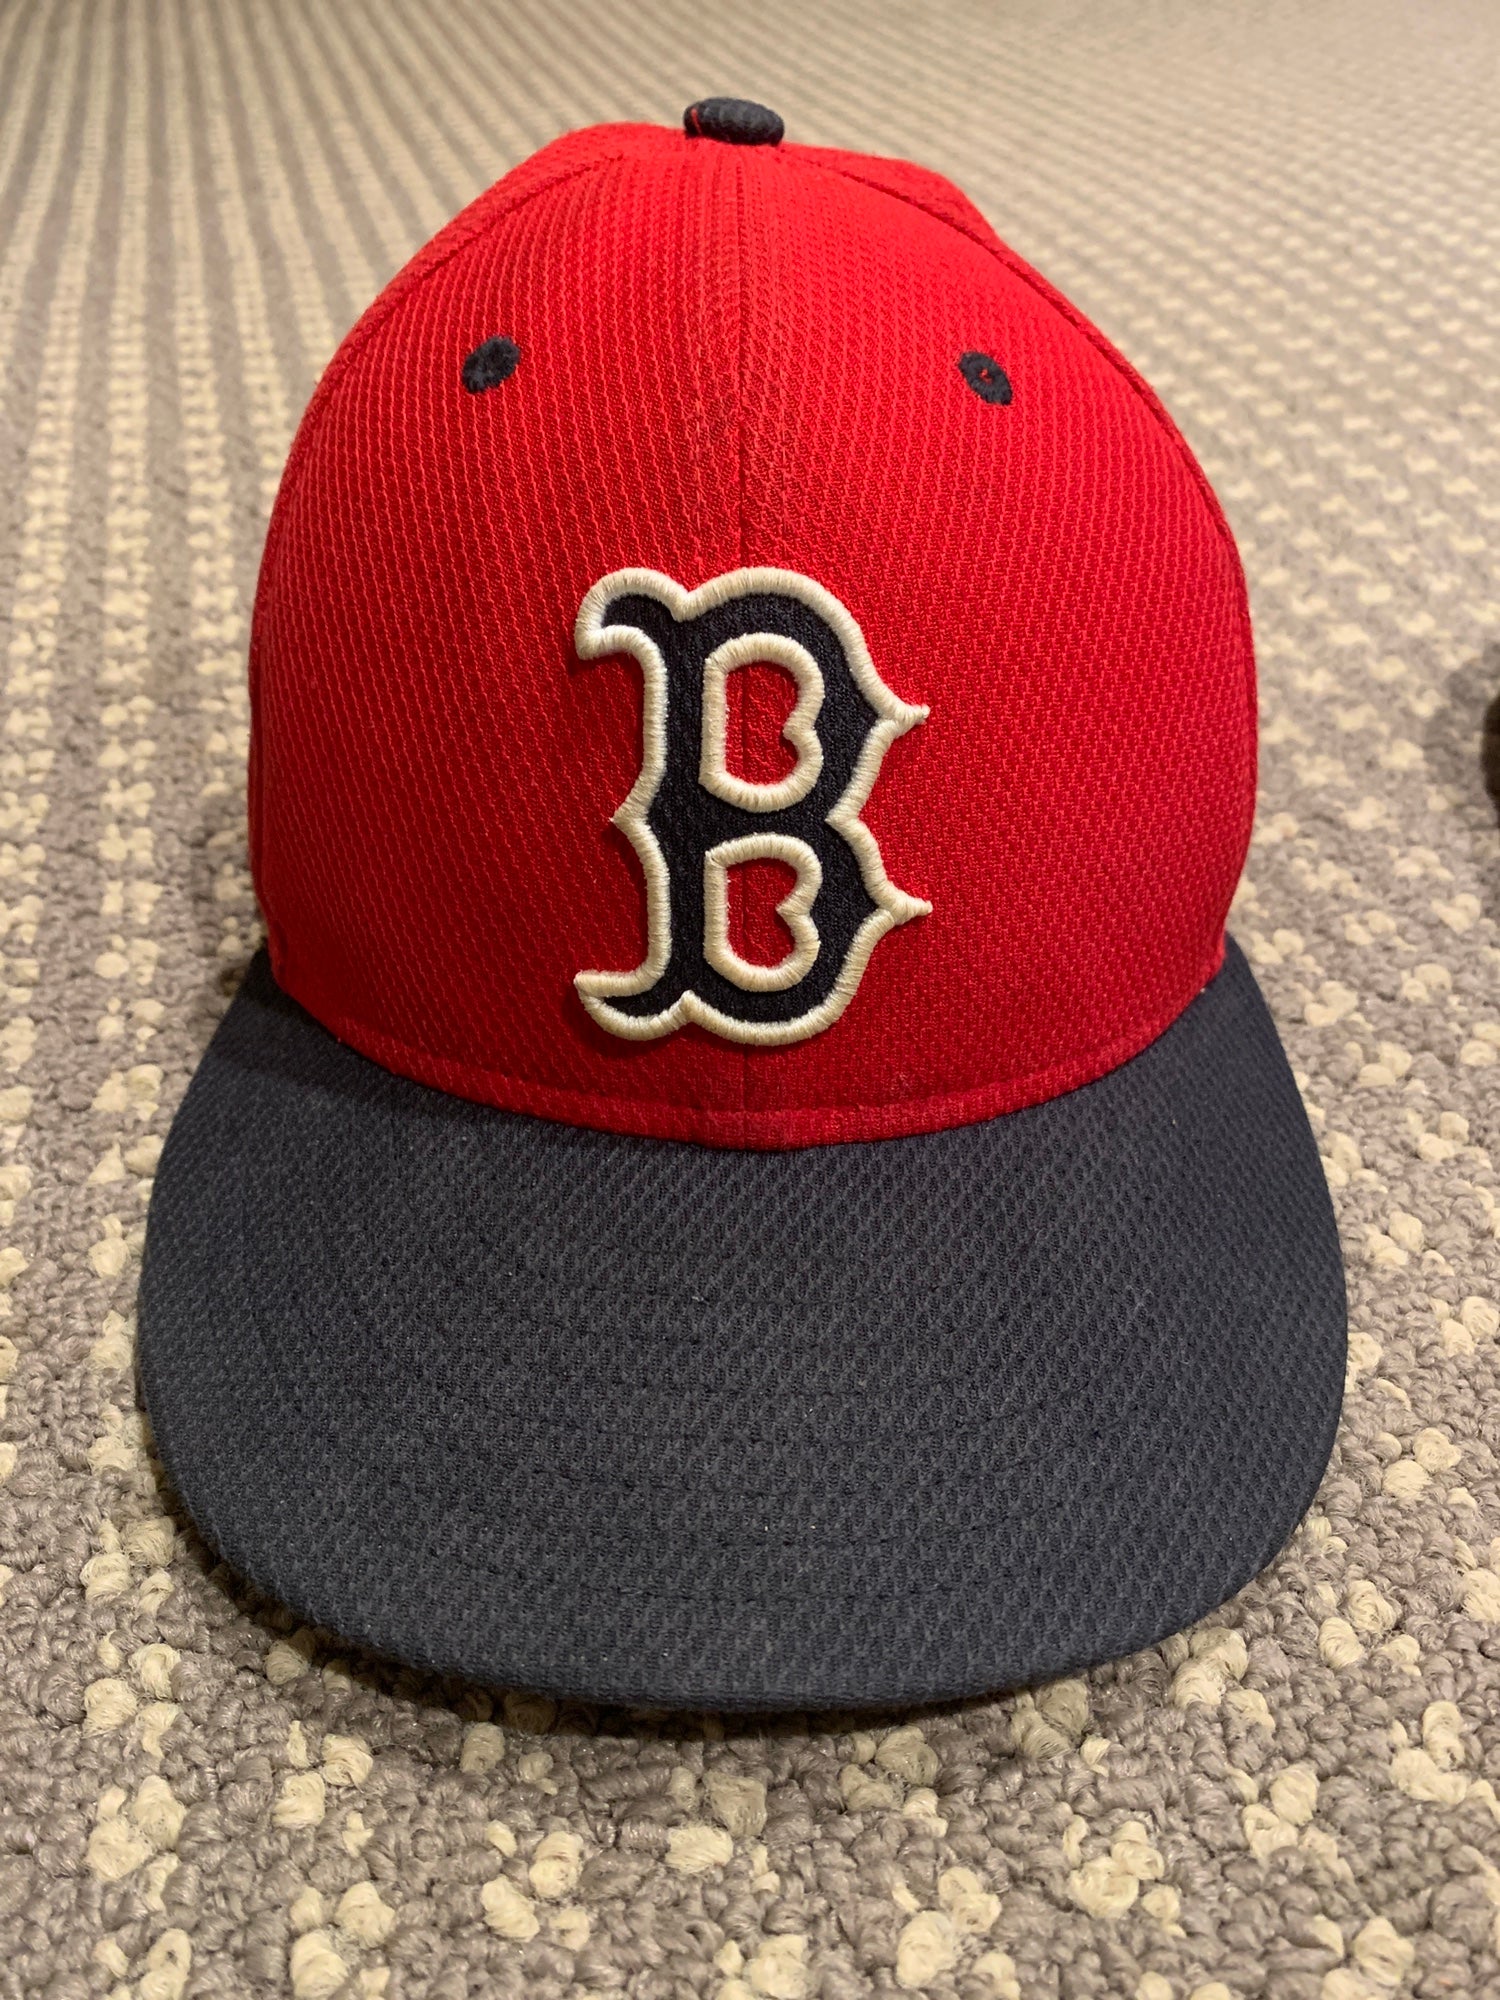 Boston Red Sox Strap Back Hat/Cap-Bay State Apparel Baseball Blue/Red NWT